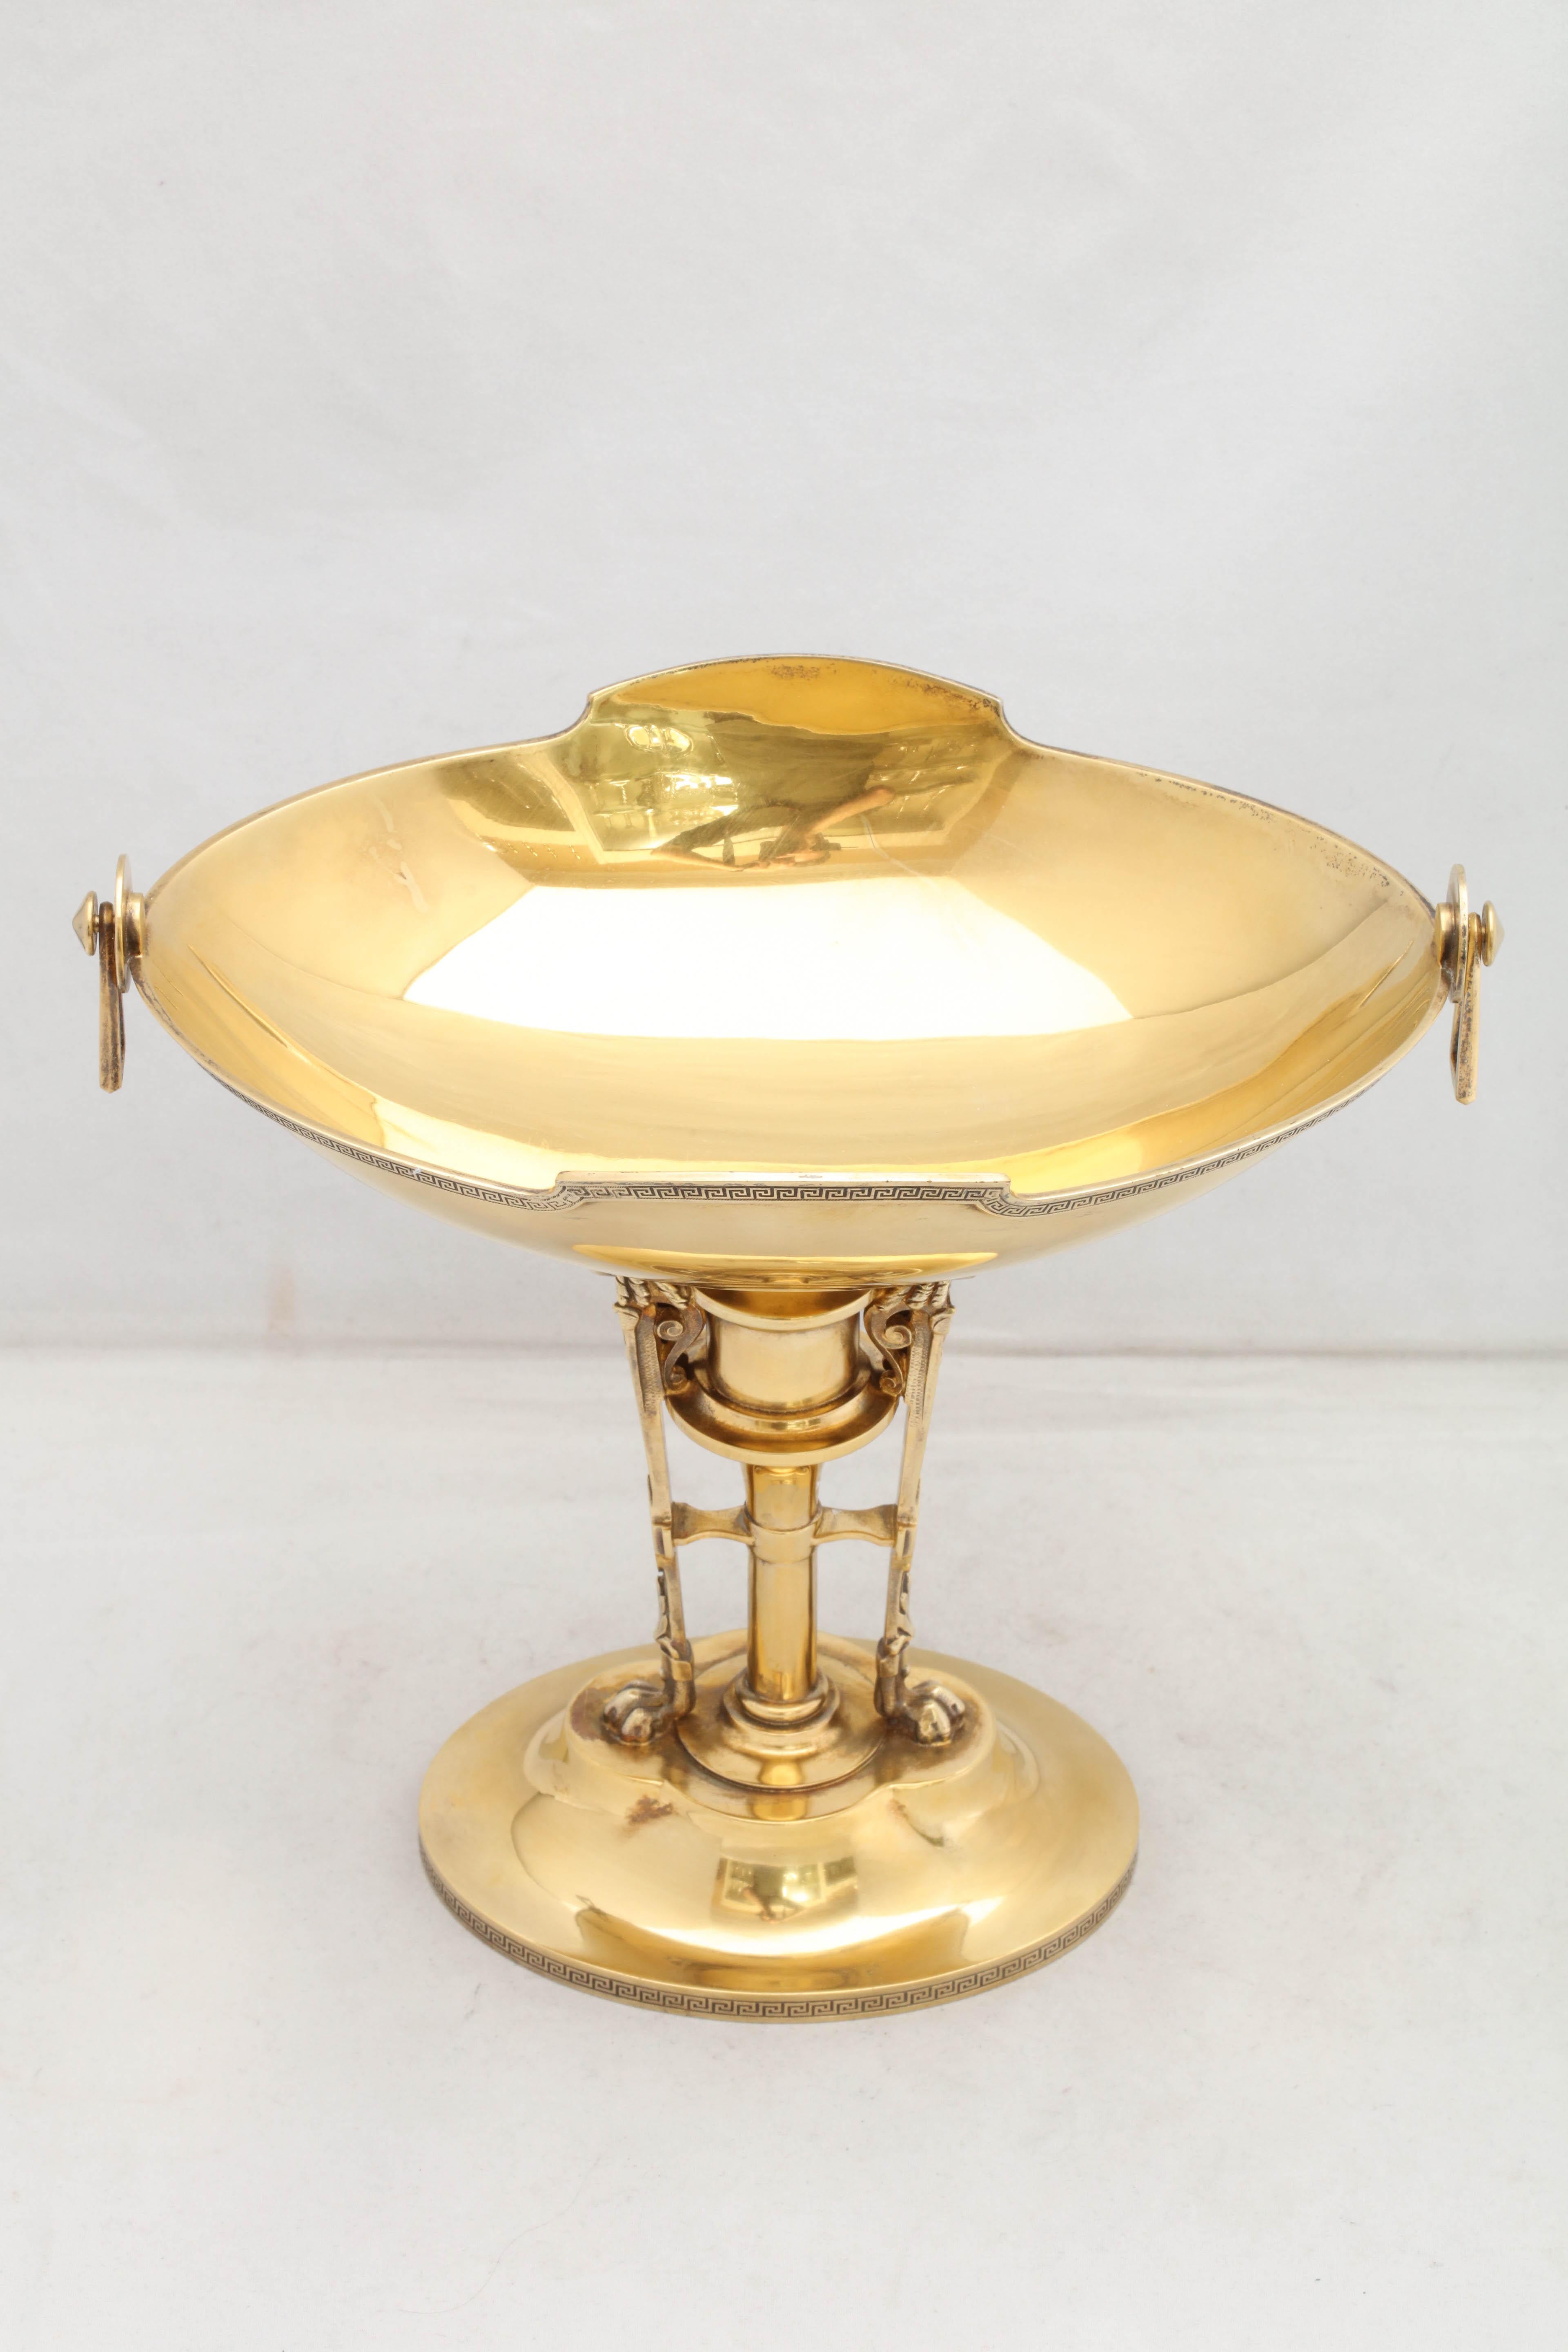 Neoclassical Sterling Silver Gilt Centrepiece by Gorham For Sale 12